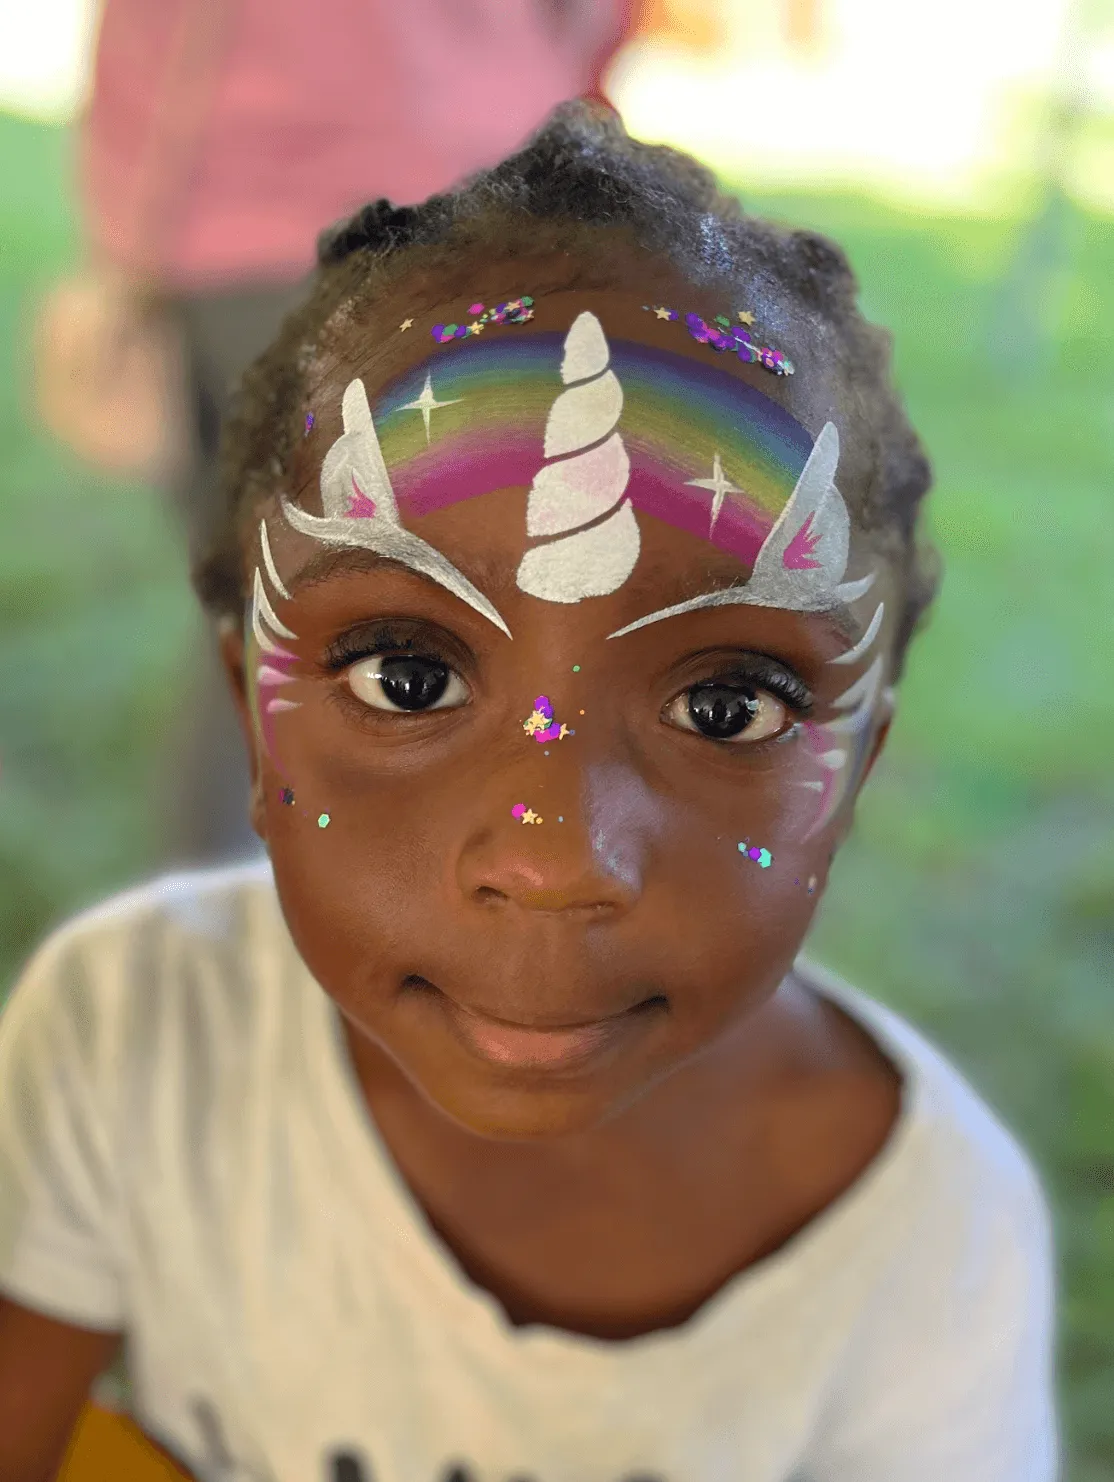 A kid proudly displaying an amazing facepaint artwork